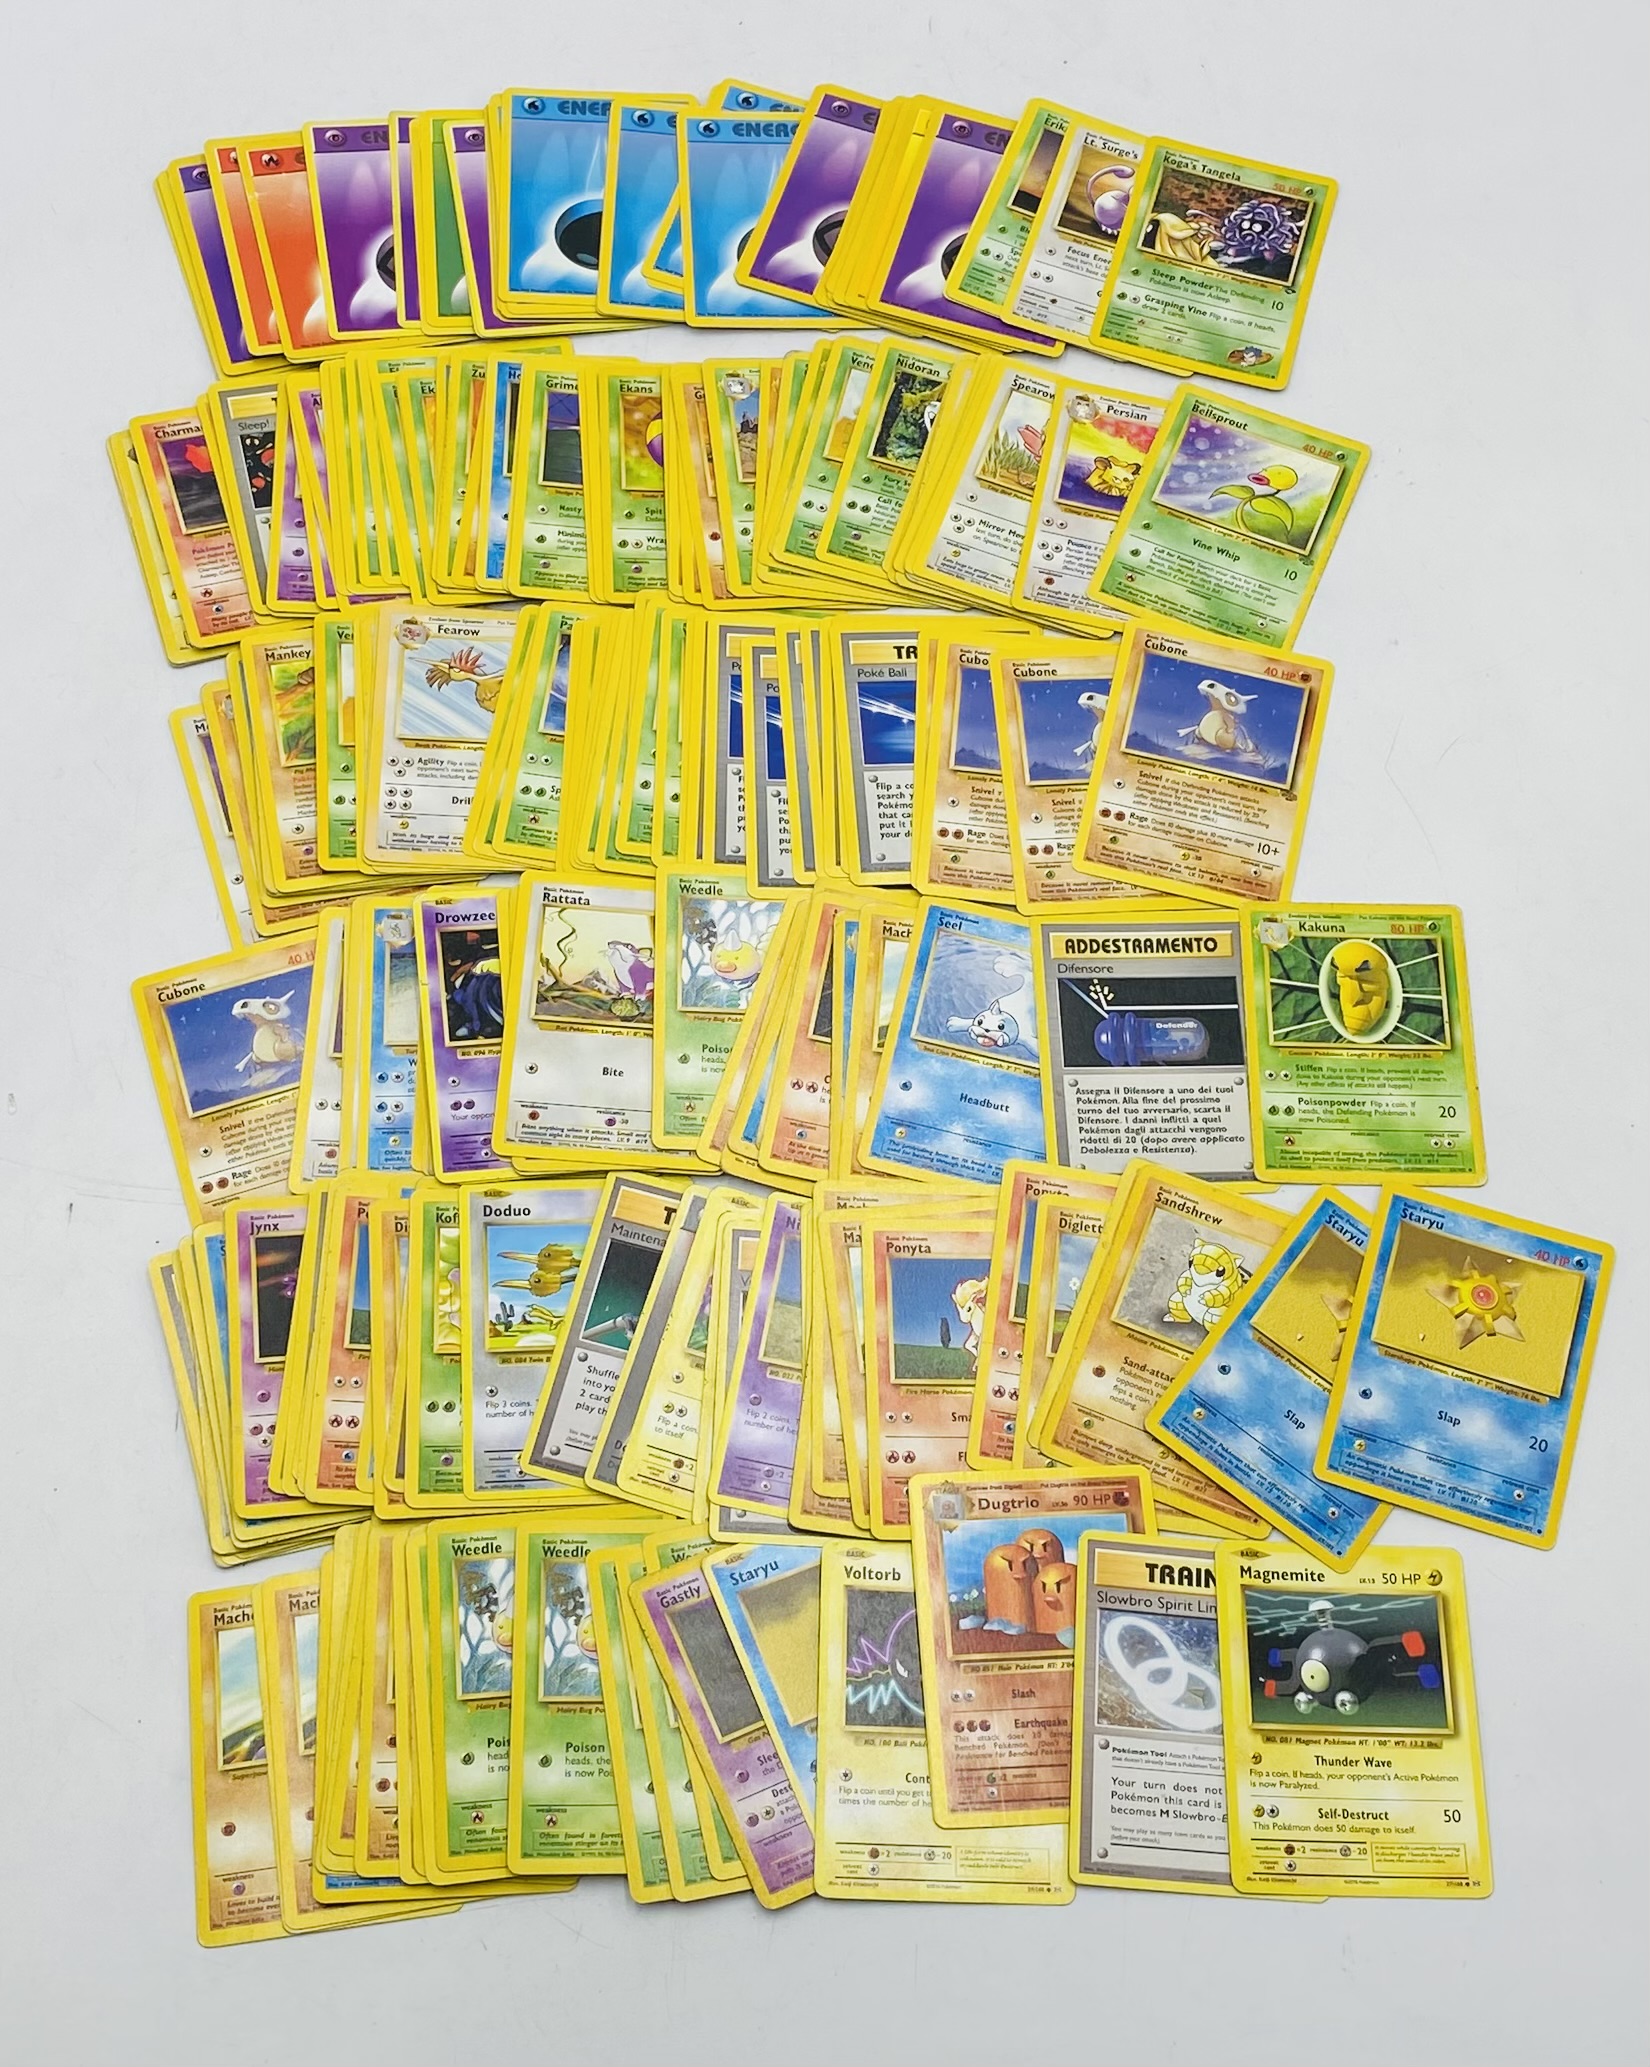 A small collection of vintage Pokemon cards from Base Set, Jungle, Fossil, Team Rocket, Base Set